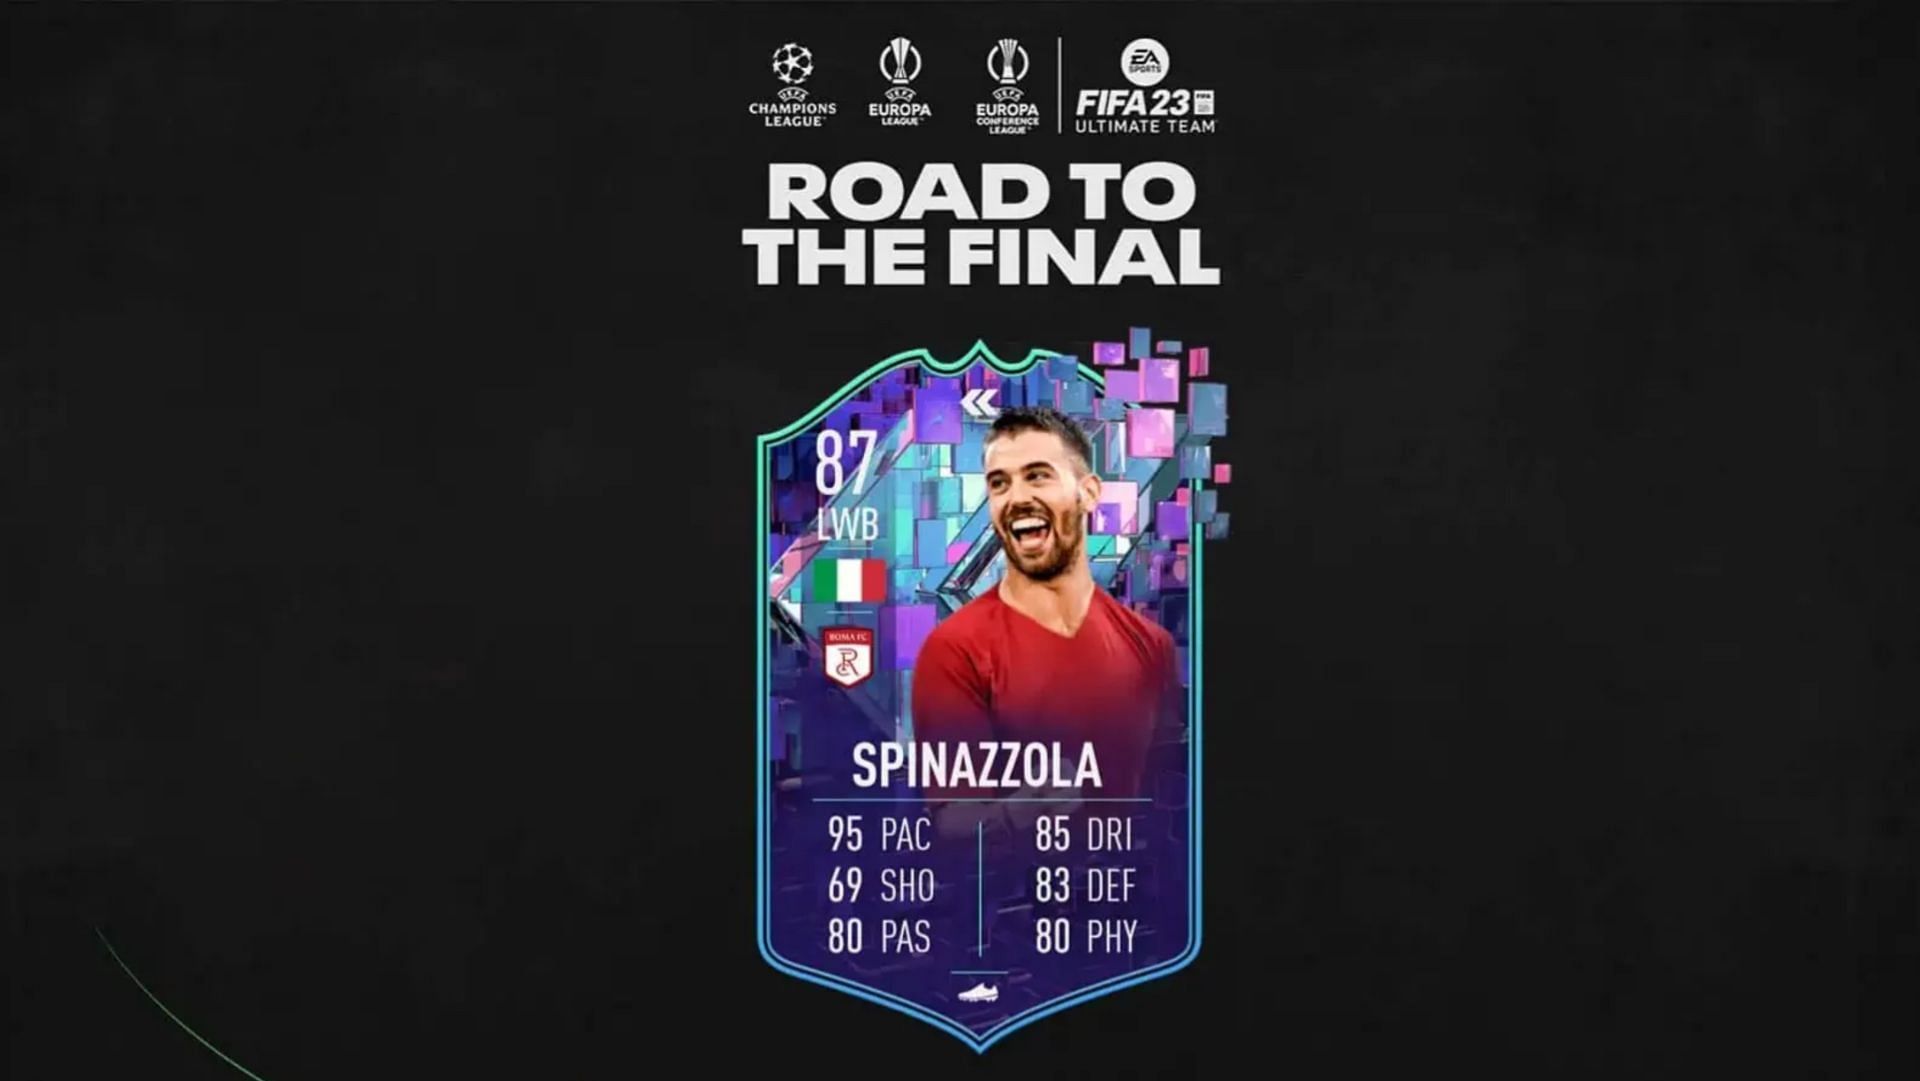 FIFA 23 players can get plenty of value from the Leonardo Spinazzola Flashback SBC in Ultimate Team (image via EA Sports)